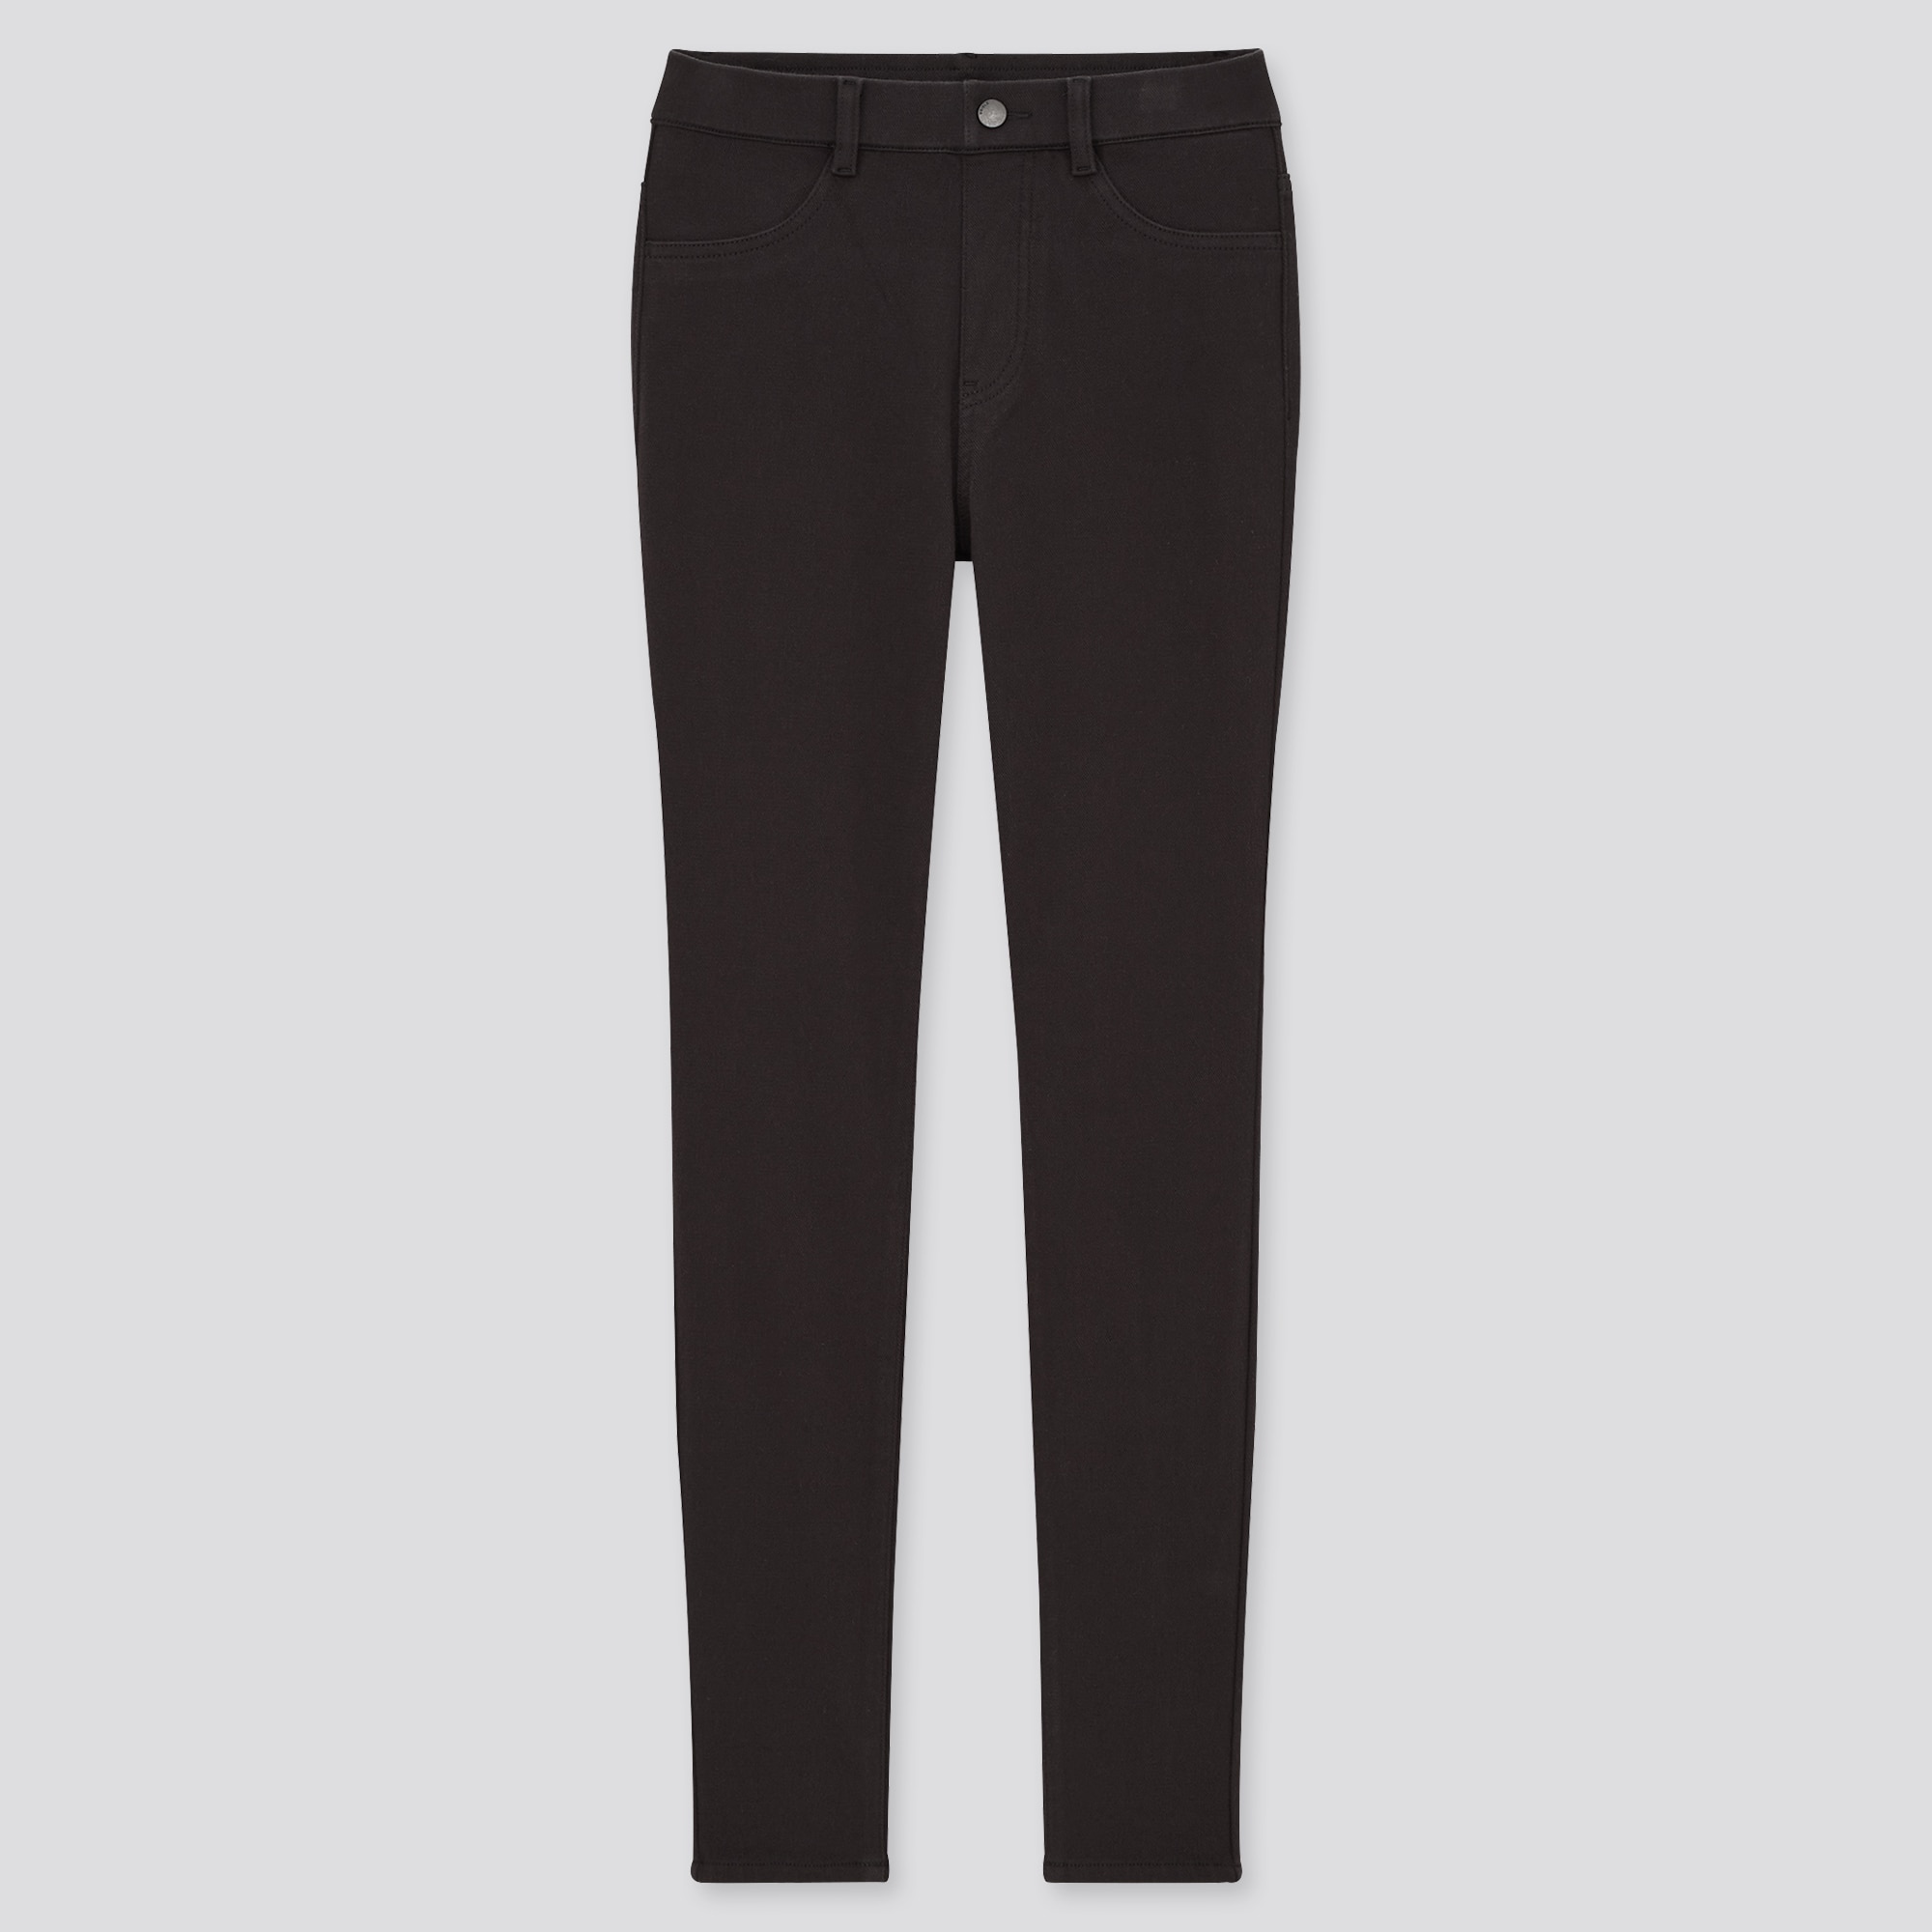 Ultra Stretch Leggings Pants Uniqlo Heattech  International Society of  Precision Agriculture